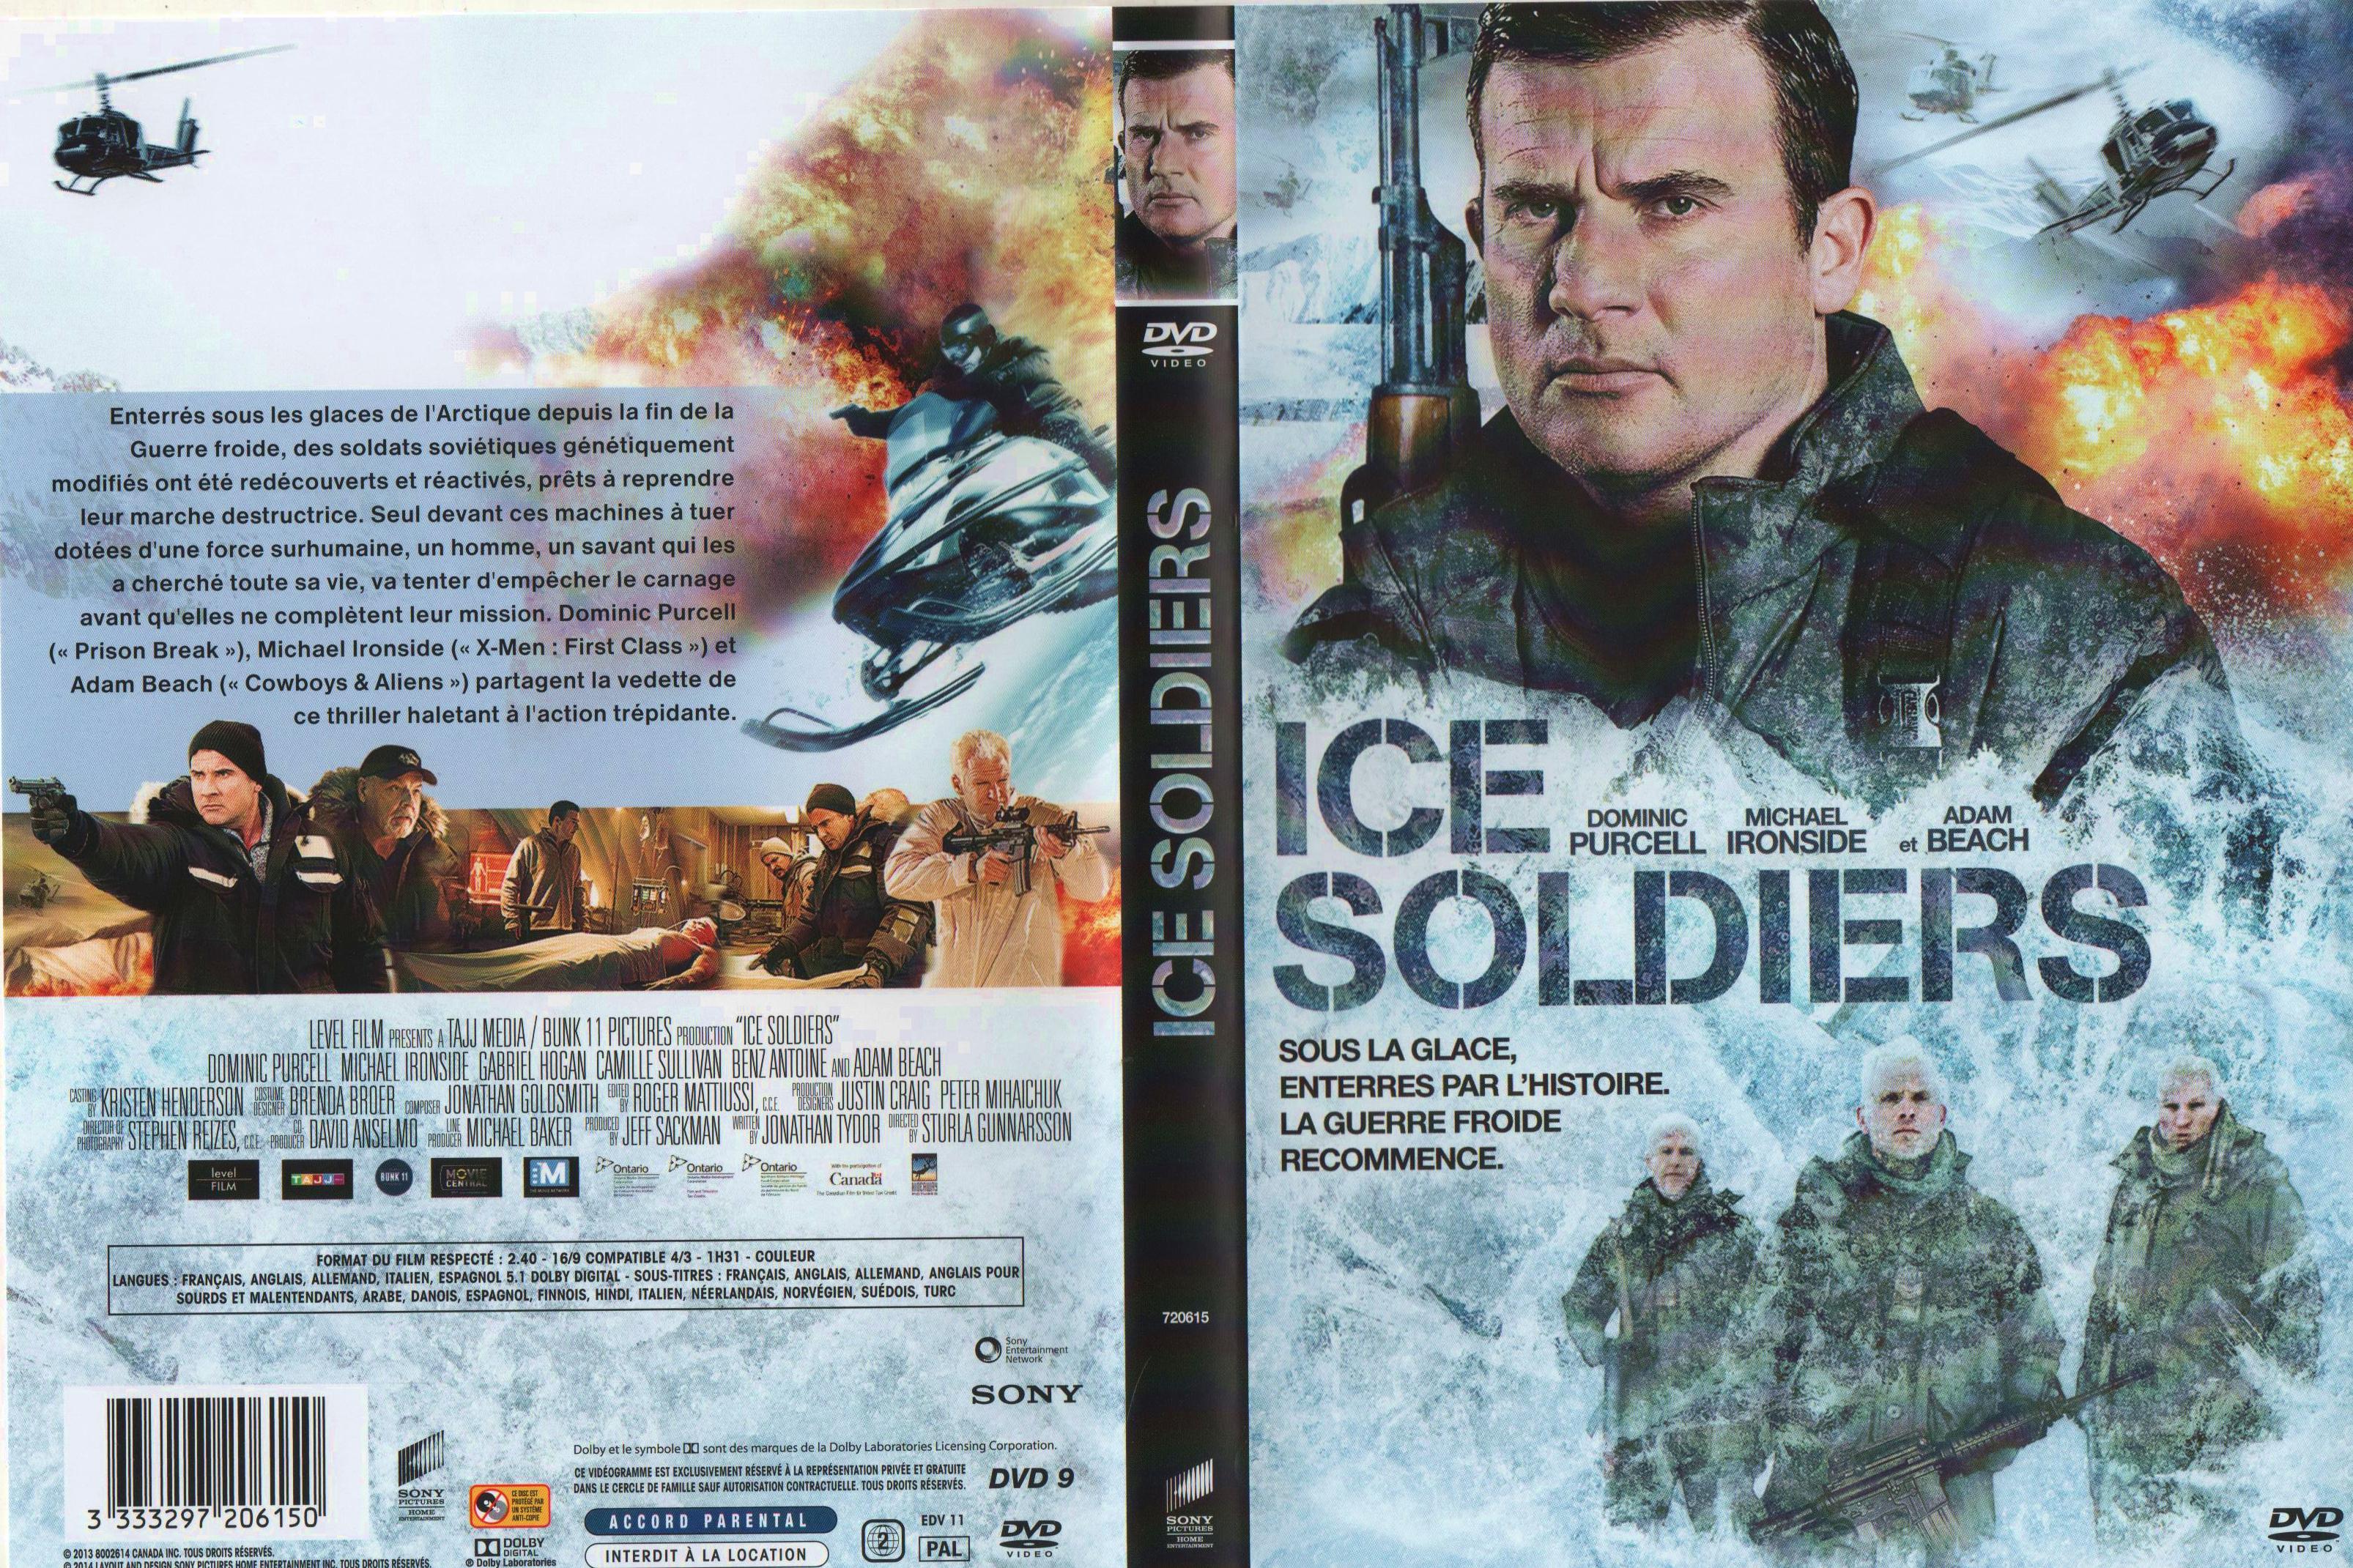 Jaquette DVD Ice soldiers